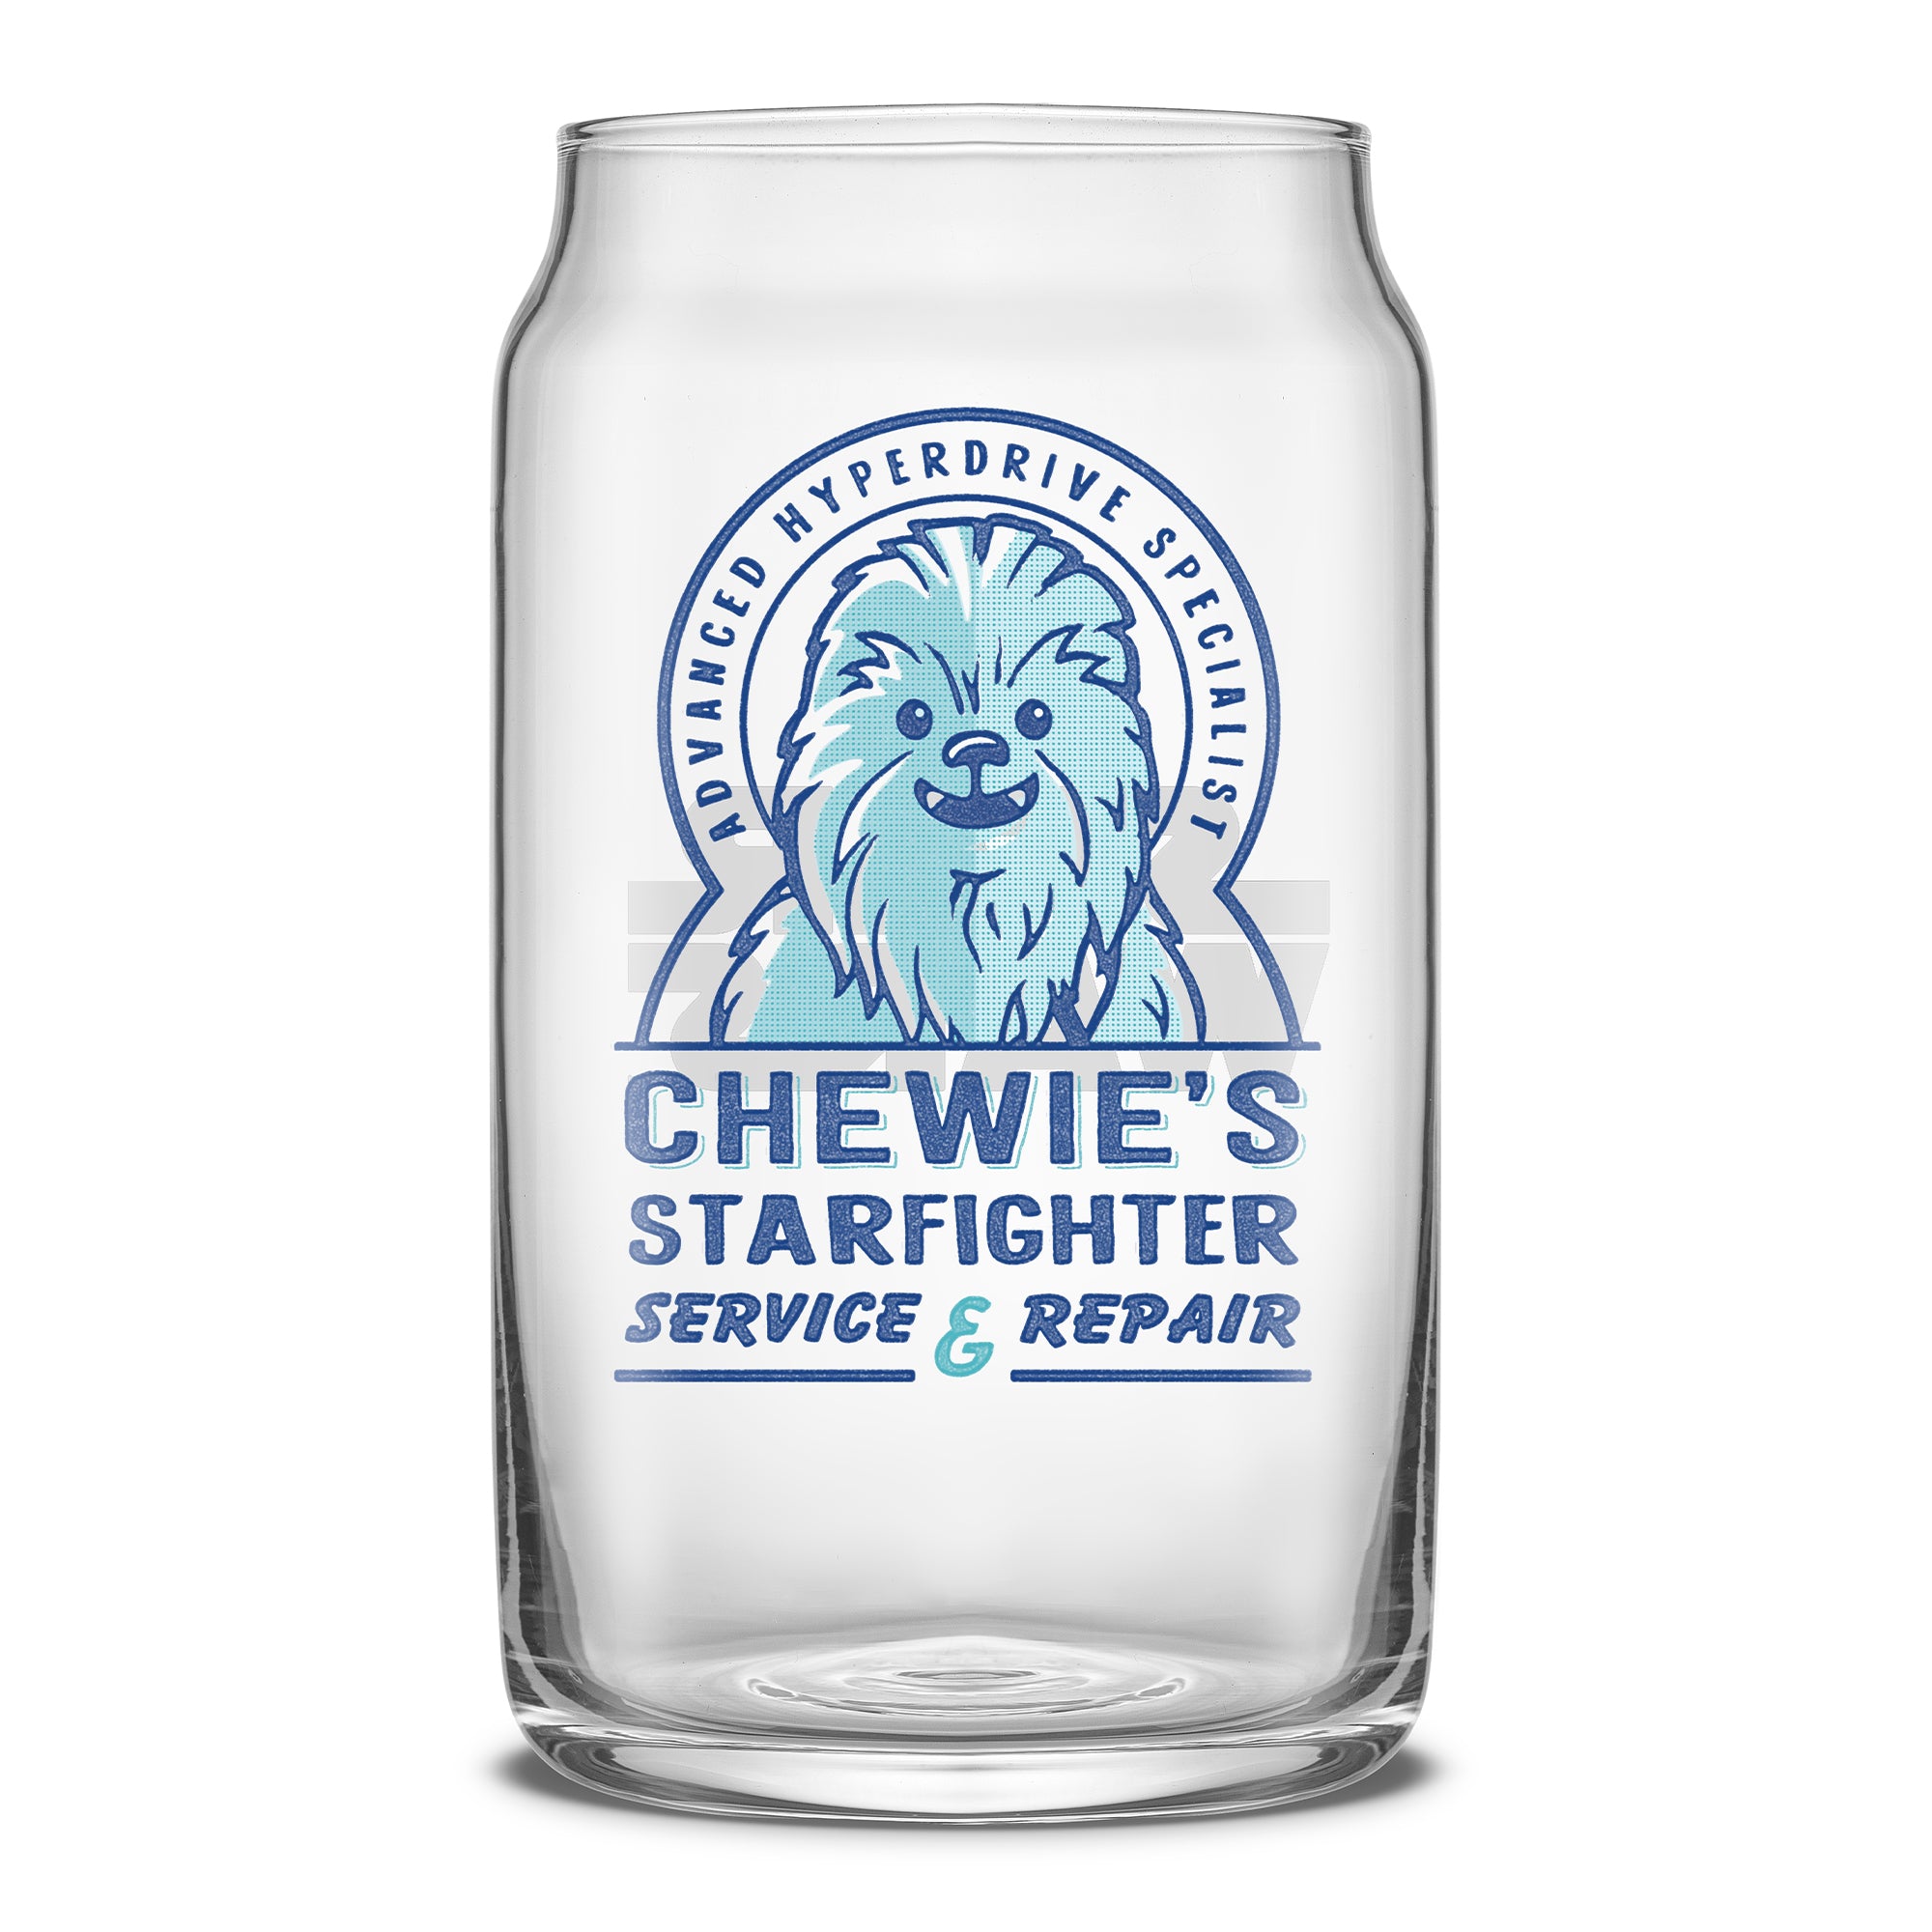 Retro-inspired Star Wars can-shaped drinking glasses featuring Chewie's Starfighter Service & Repair.